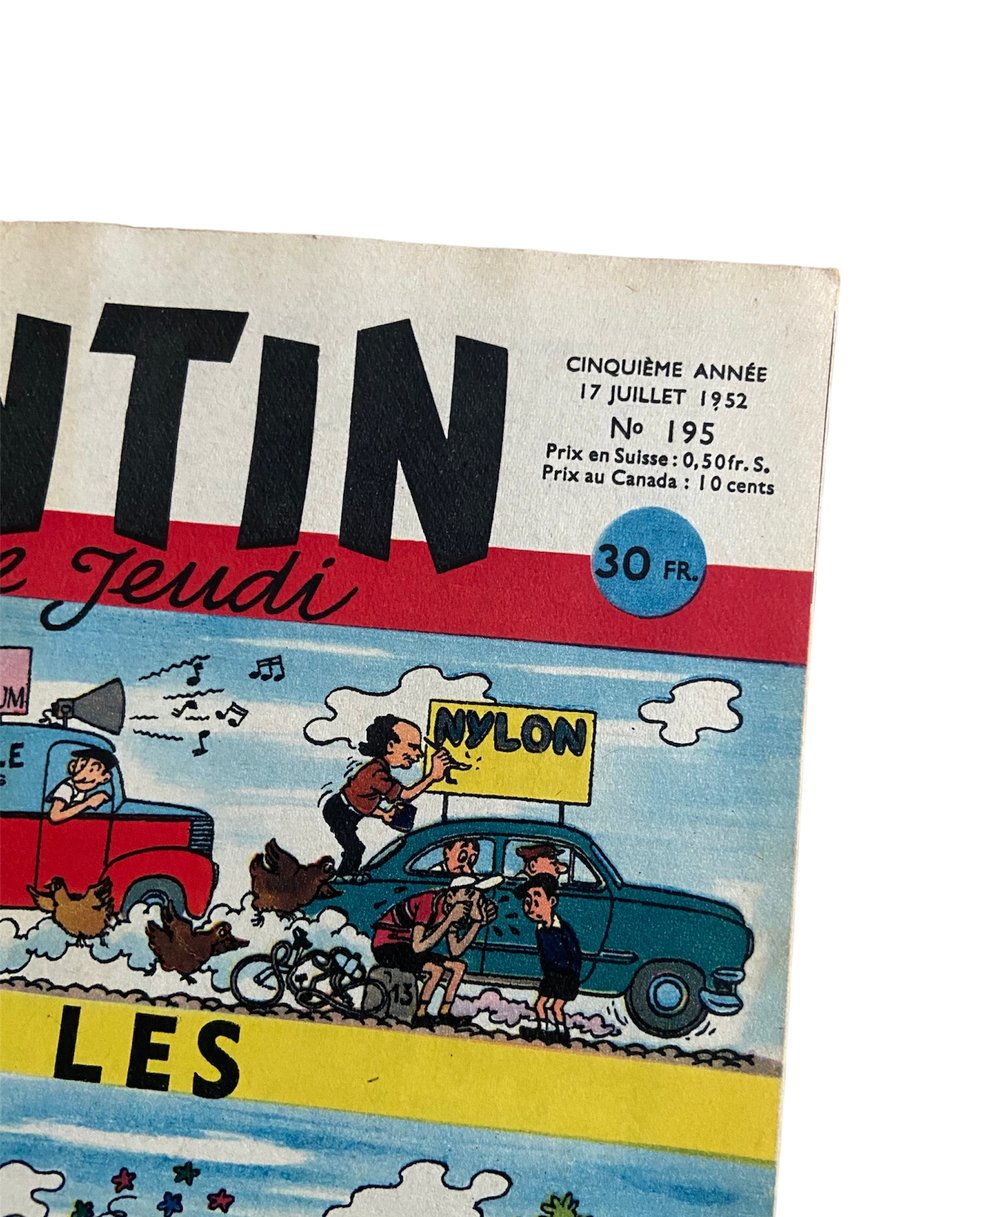 Weekly Tintin - Issue 195 - Tour de France 1952 